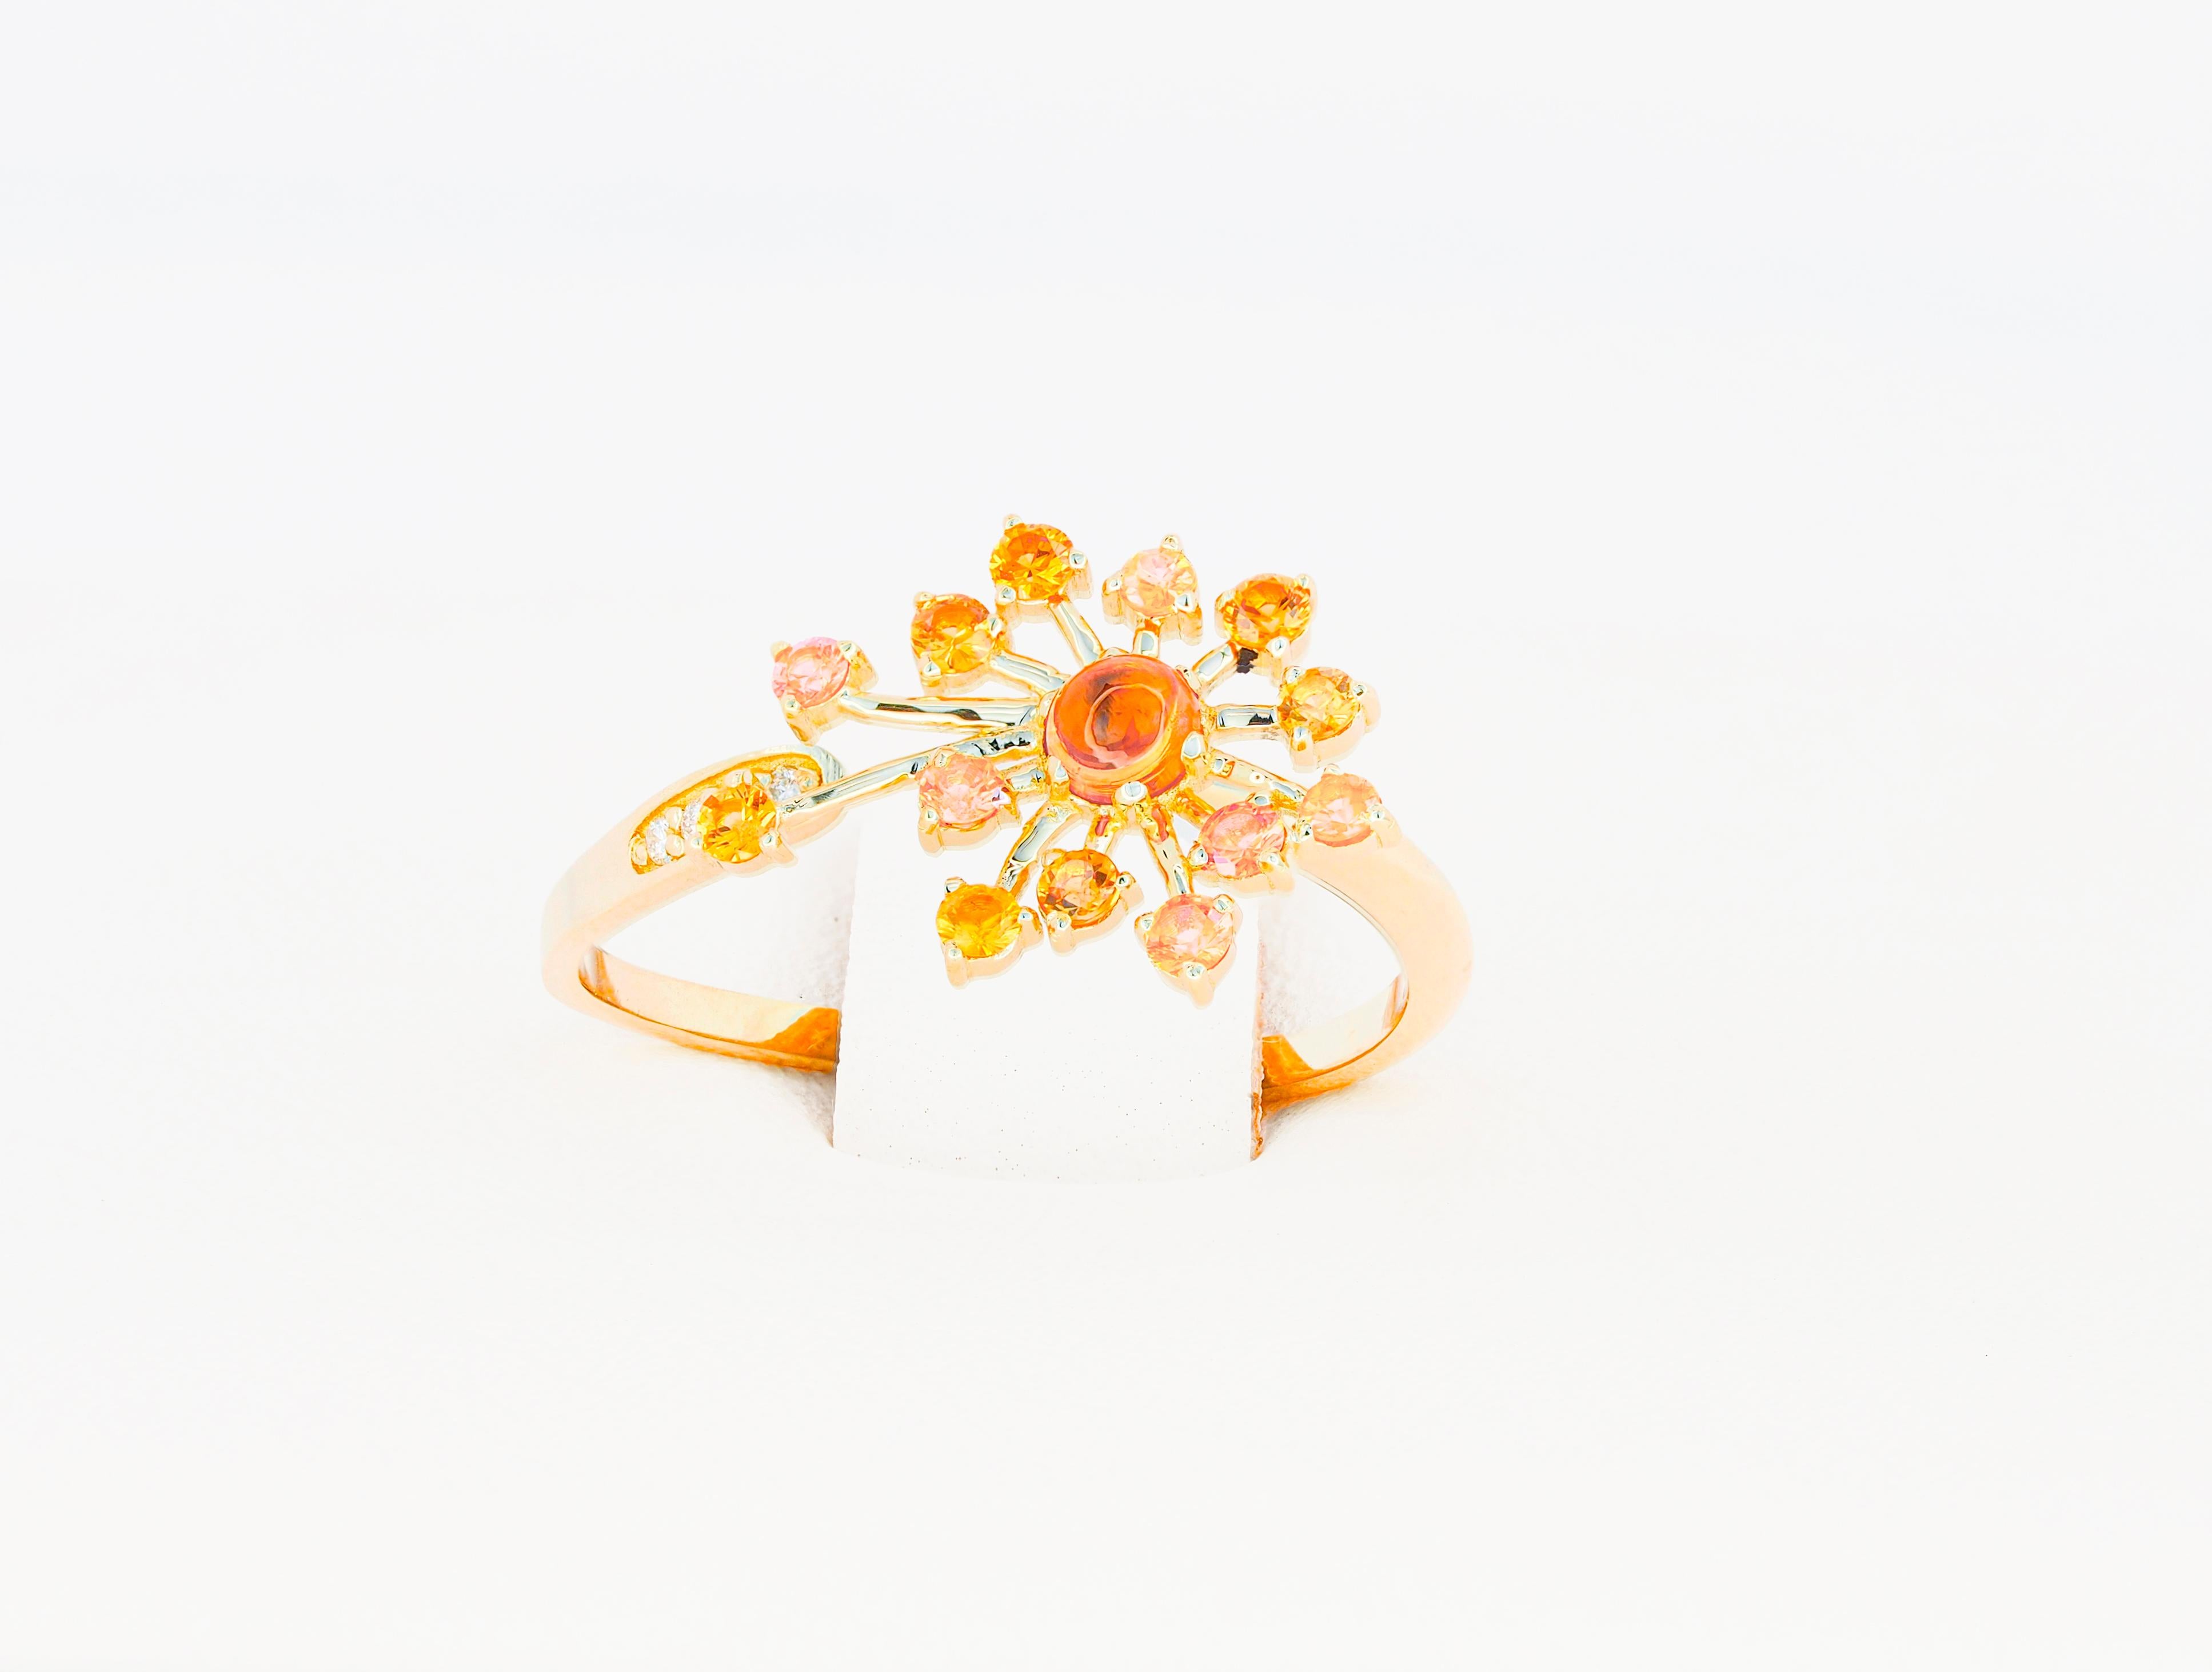 For Sale:  14 Karat Gold Ring with Yellow Sapphires. Dandelion Flower desing ring. 3